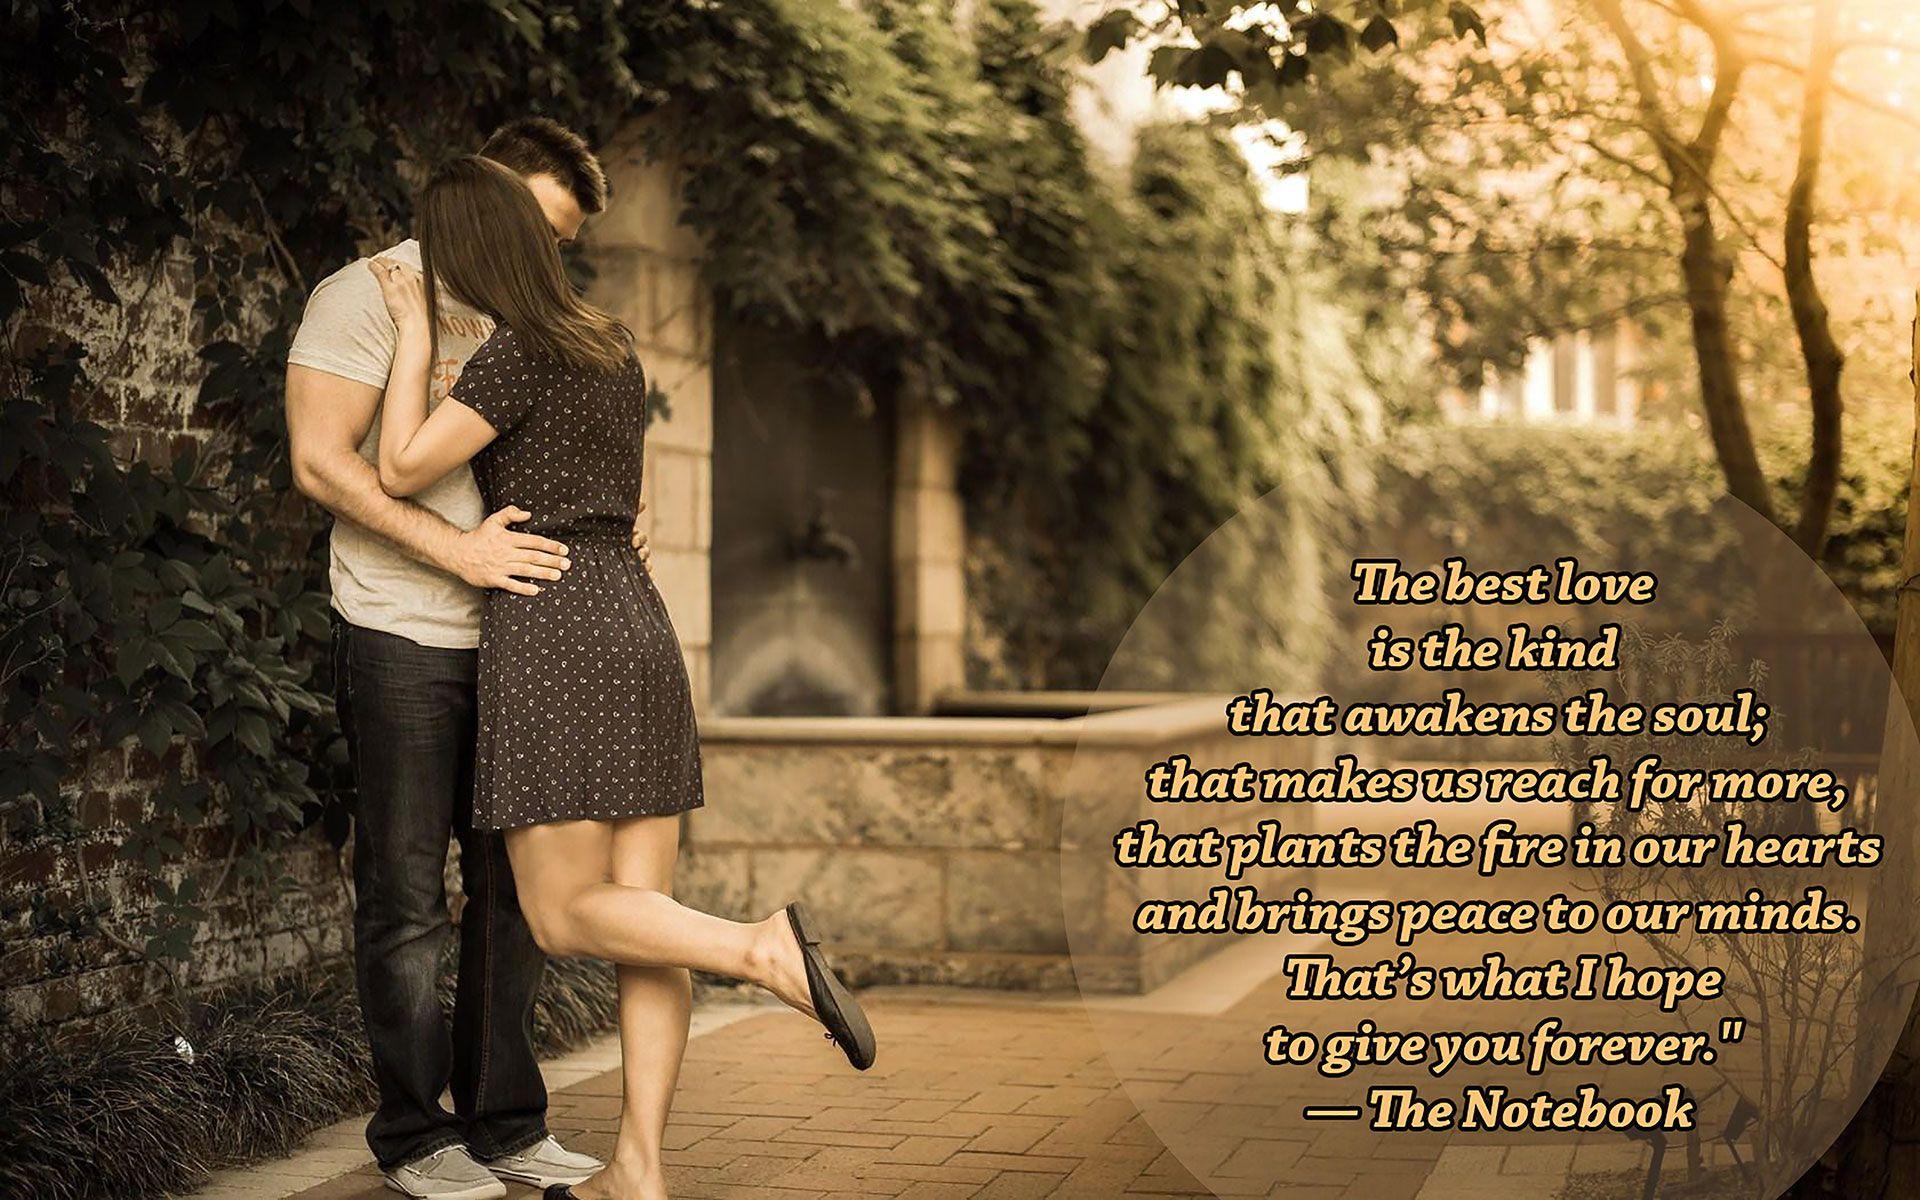 Romantic Wallpapers Of Couples With Quotes Wallpaper Cave